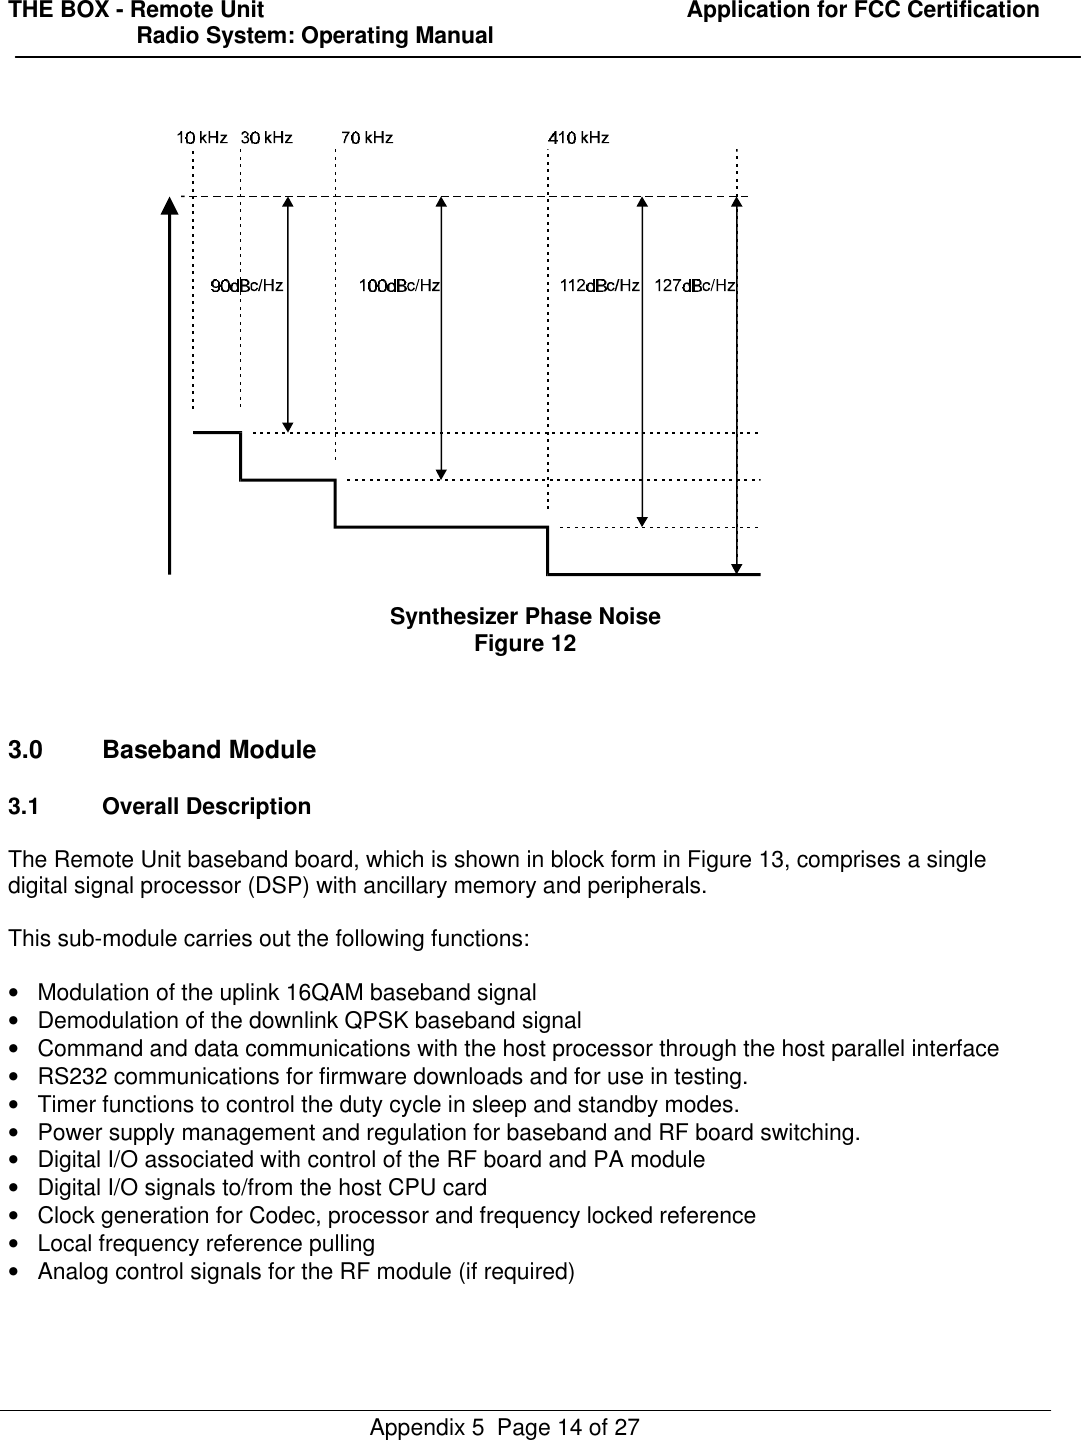 THE BOX - Remote Unit                                                                  Application for FCC Certification                    Radio System: Operating ManualAppendix 5  Page 14 of 27Synthesizer Phase NoiseFigure 123.0 Baseband Module3.1 Overall DescriptionThe Remote Unit baseband board, which is shown in block form in Figure 13, comprises a singledigital signal processor (DSP) with ancillary memory and peripherals.This sub-module carries out the following functions:• Modulation of the uplink 16QAM baseband signal• Demodulation of the downlink QPSK baseband signal• Command and data communications with the host processor through the host parallel interface• RS232 communications for firmware downloads and for use in testing.• Timer functions to control the duty cycle in sleep and standby modes.• Power supply management and regulation for baseband and RF board switching.• Digital I/O associated with control of the RF board and PA module• Digital I/O signals to/from the host CPU card• Clock generation for Codec, processor and frequency locked reference• Local frequency reference pulling• Analog control signals for the RF module (if required)